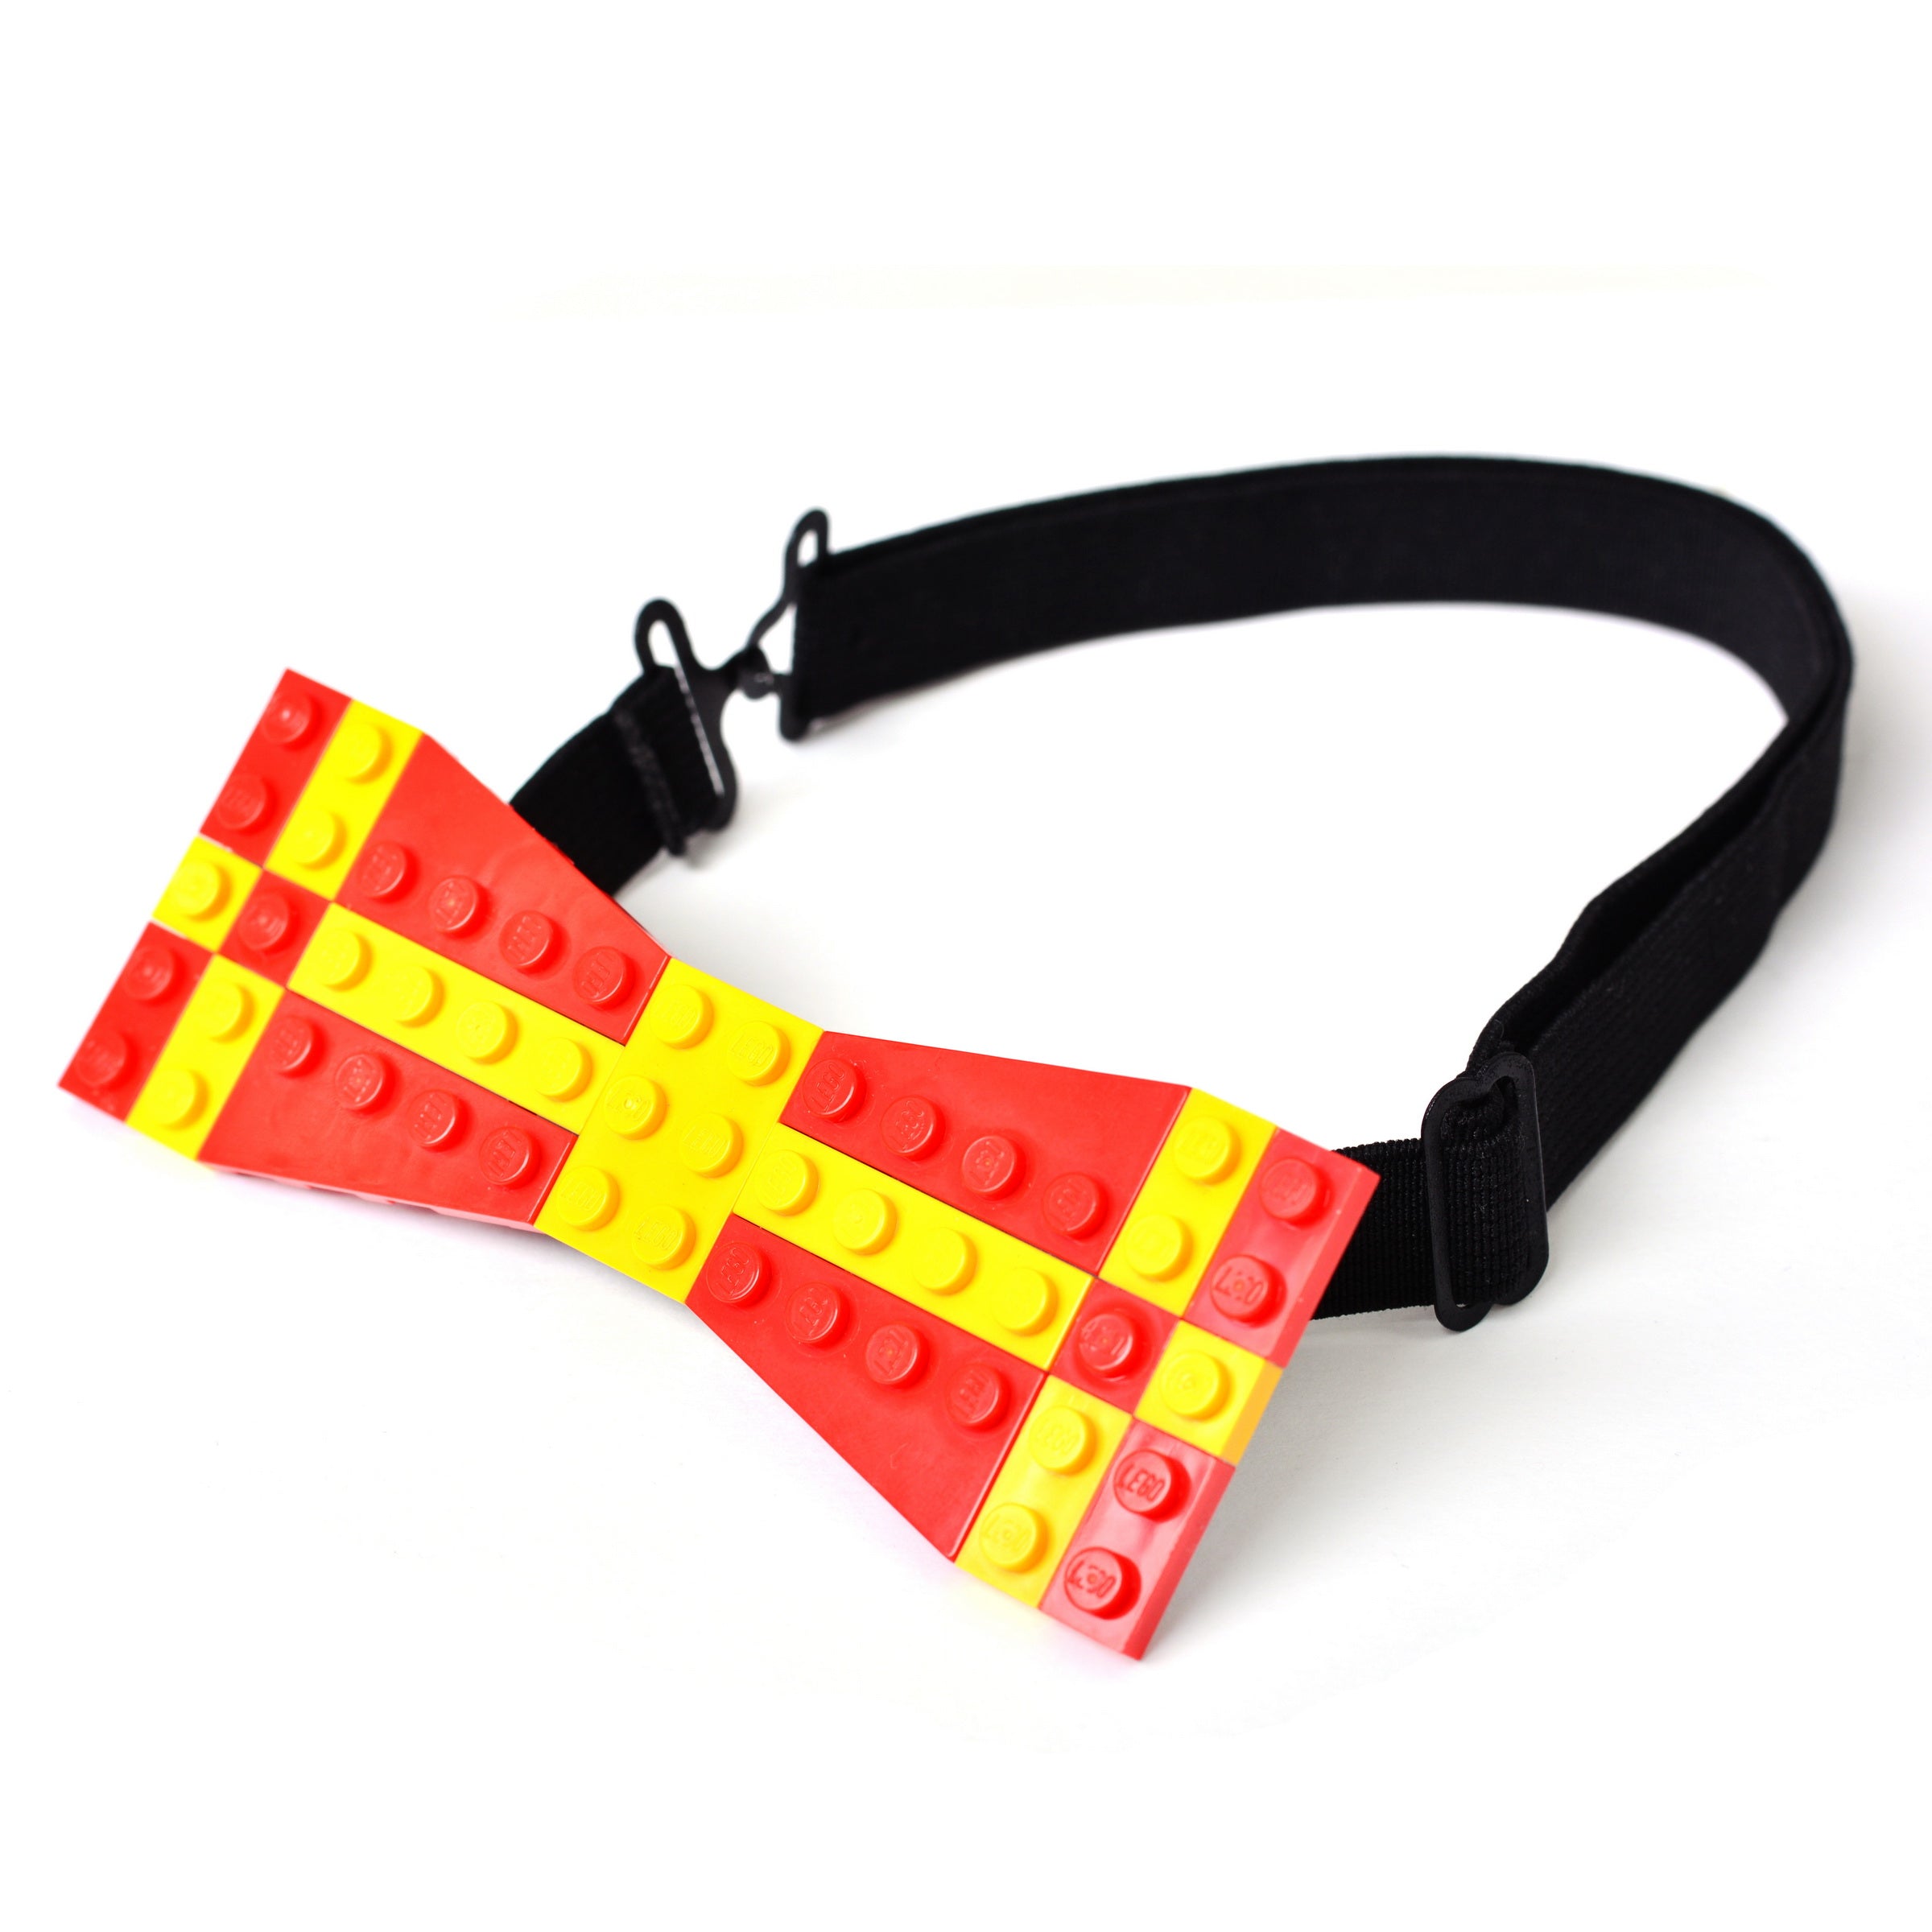 Red with yellow cross pattern